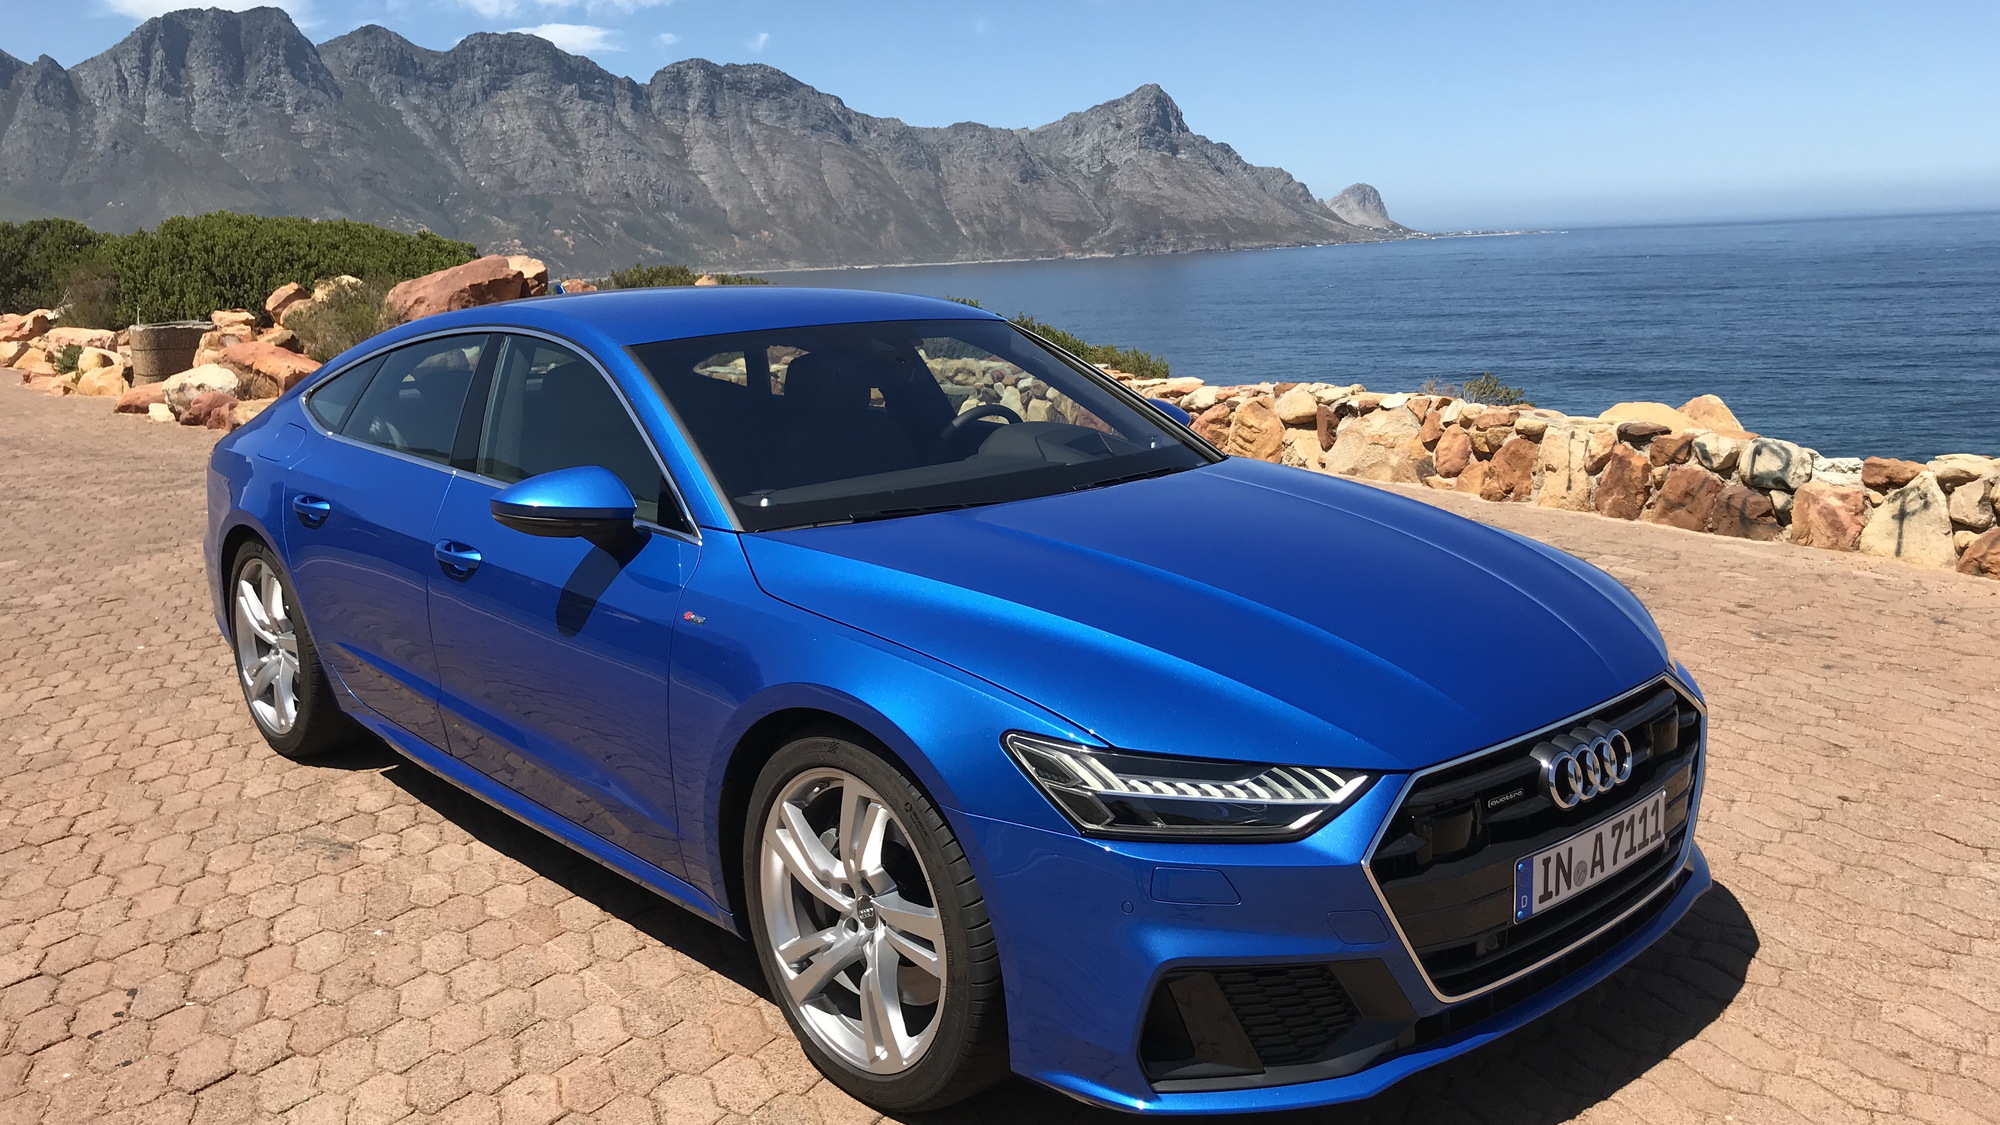 2019 Audi A7, January, 2018 media drive, Cape Town, South Africa